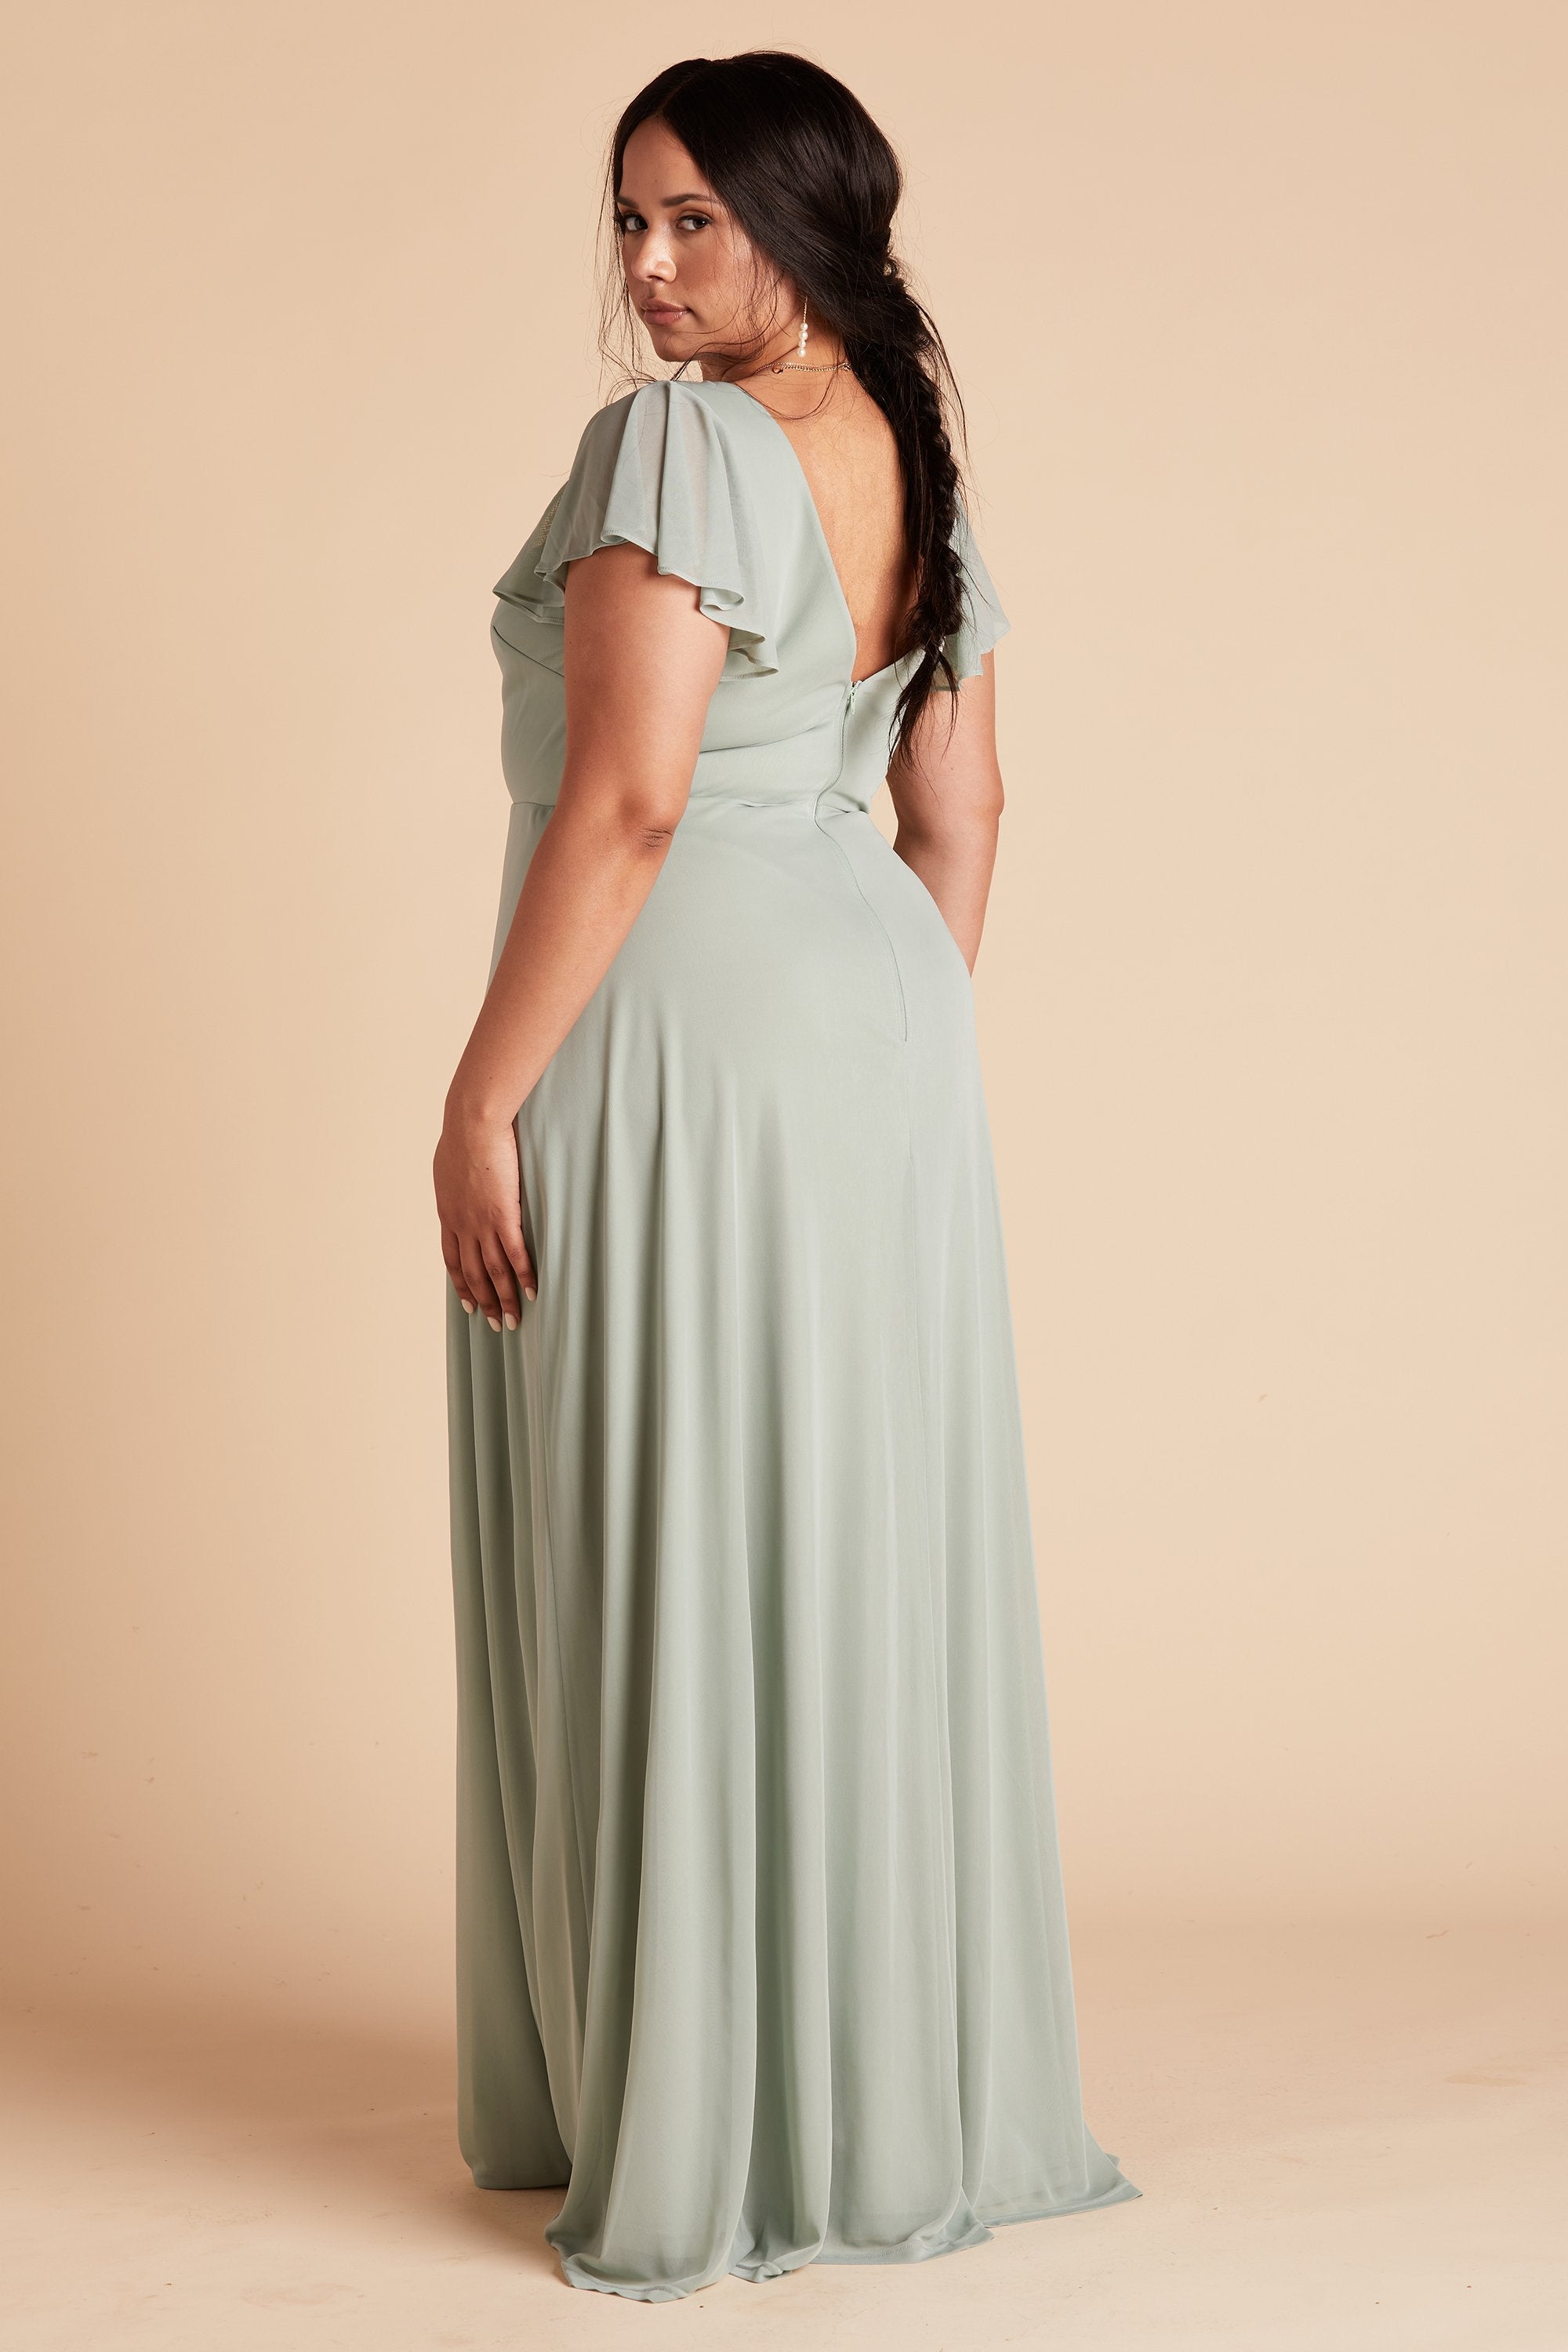 Hannah plus size bridesmaids dress in sage green mesh by Birdy Grey, side view